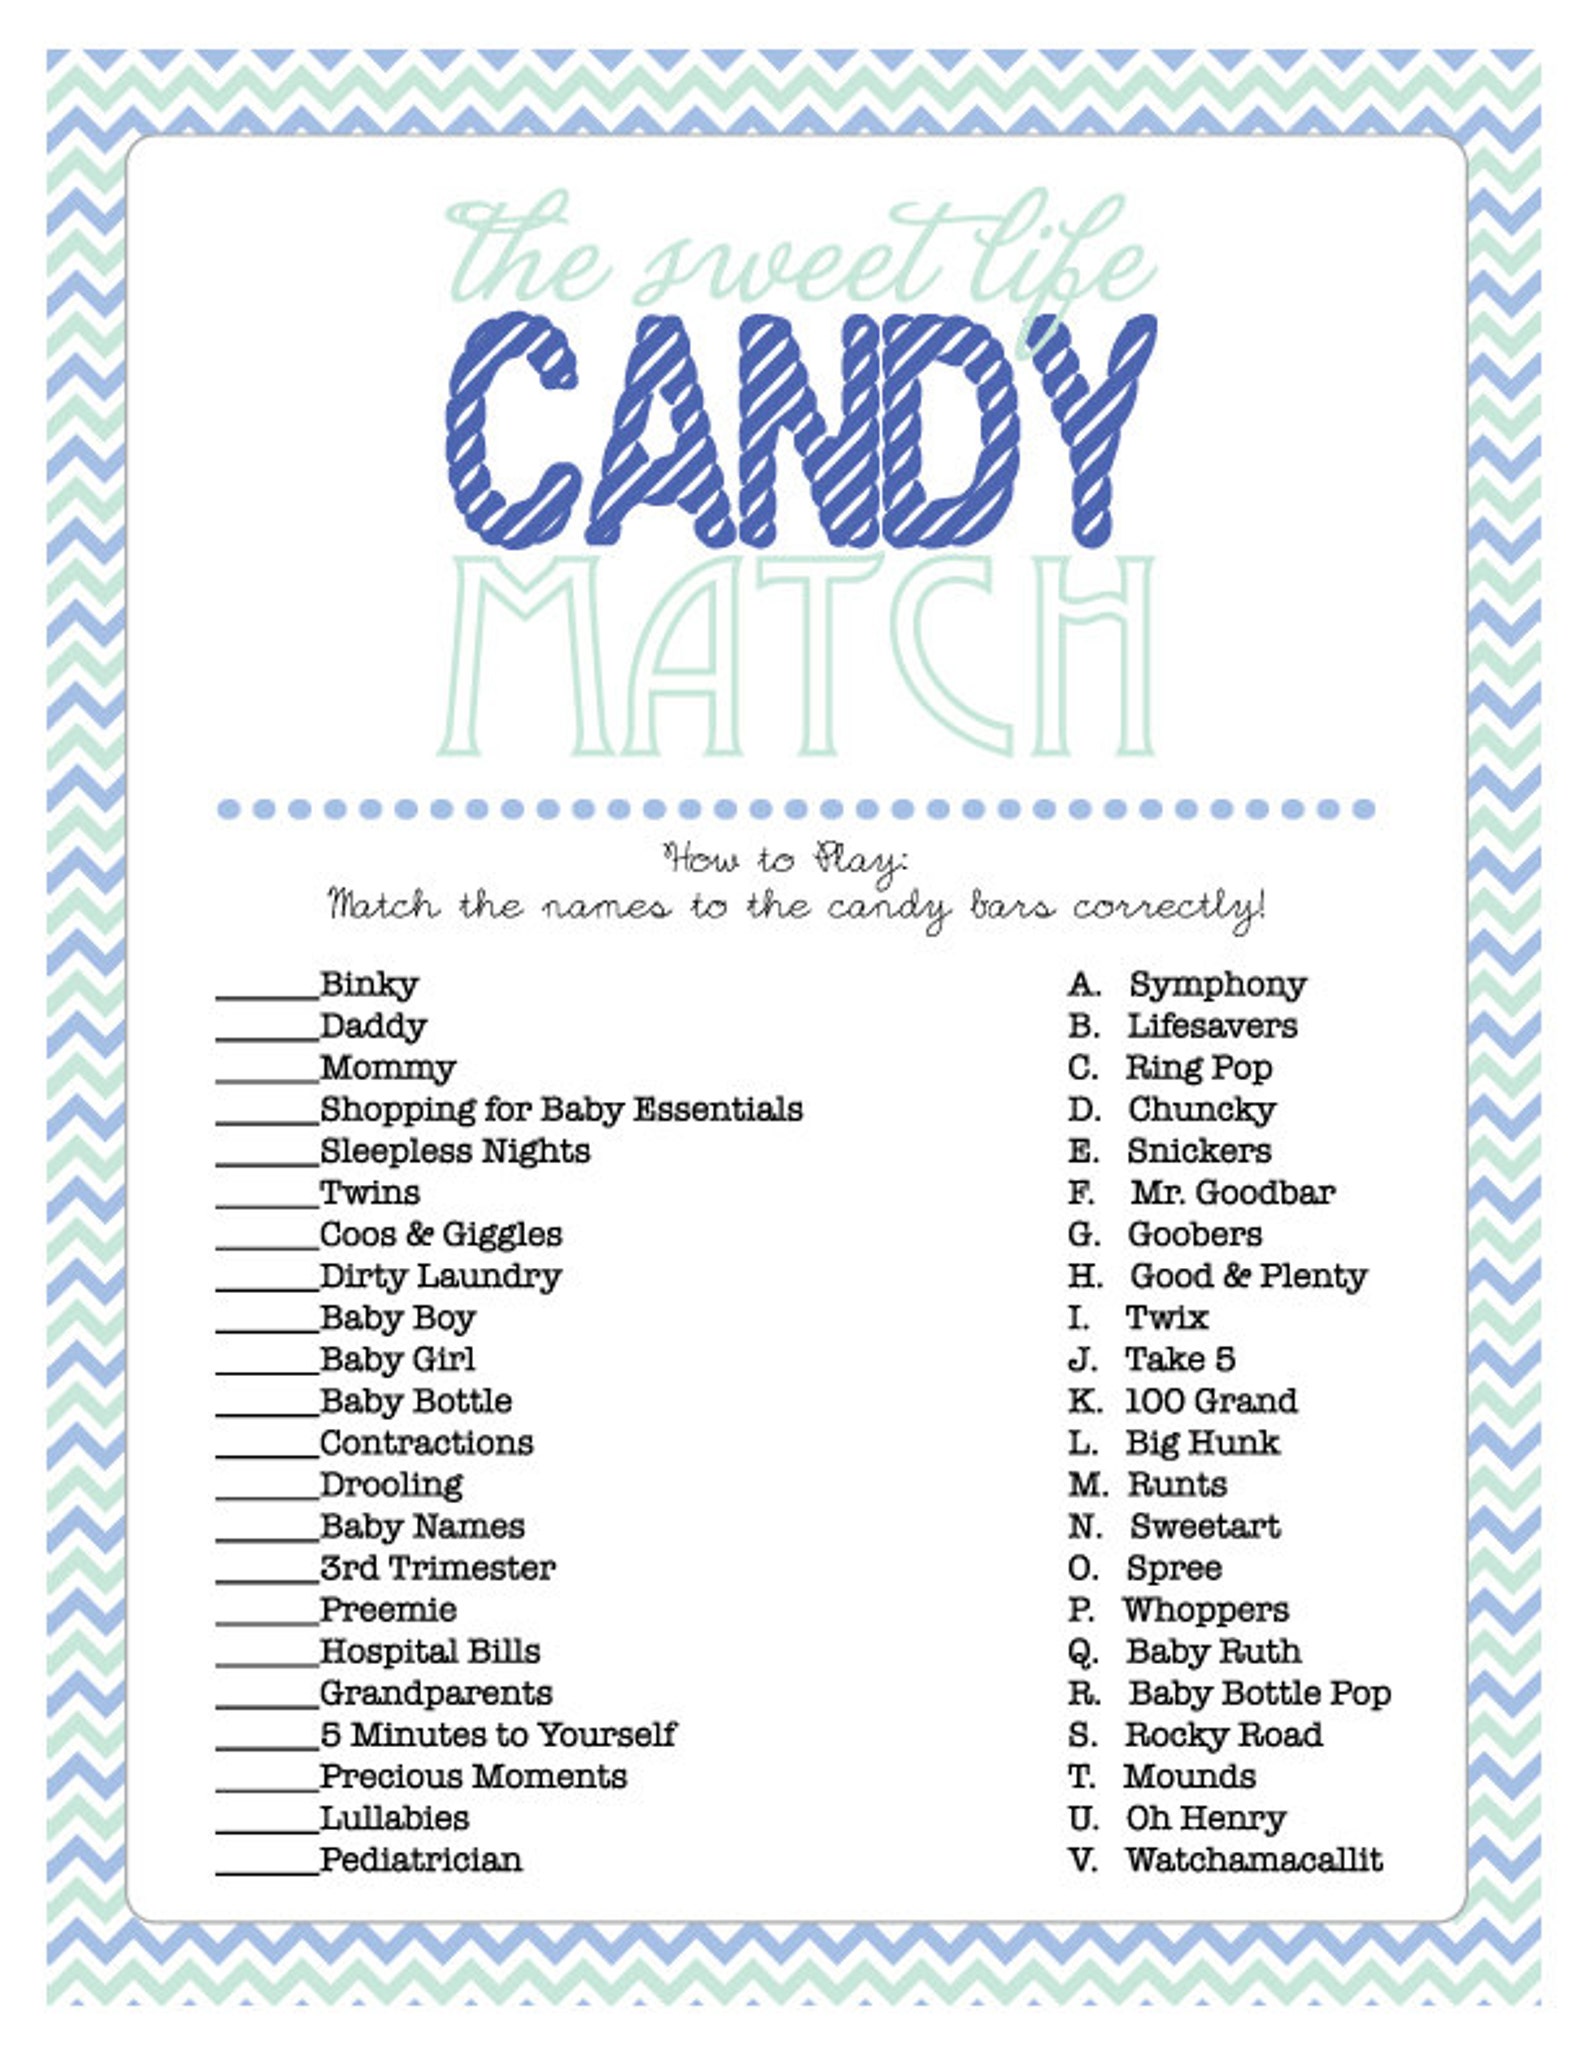 Baby Shower Game Sheet for The Sweet Life Candy Match Candy | Etsy